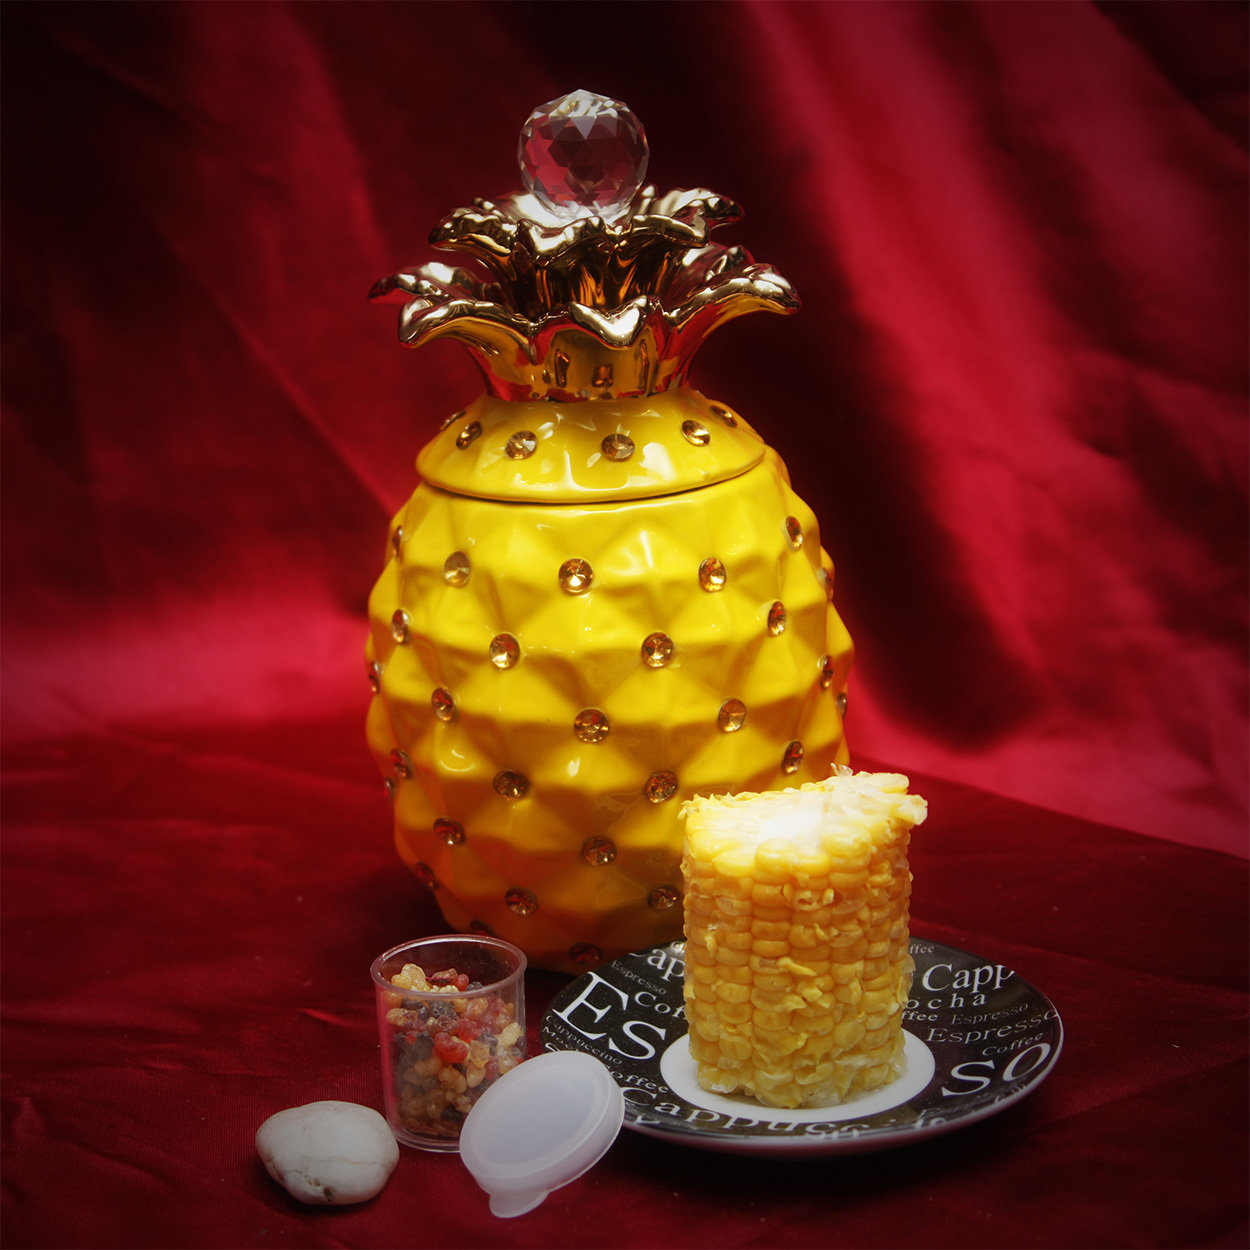 The Pineapple of Prosperity and the Amulet to protect your Job/Business